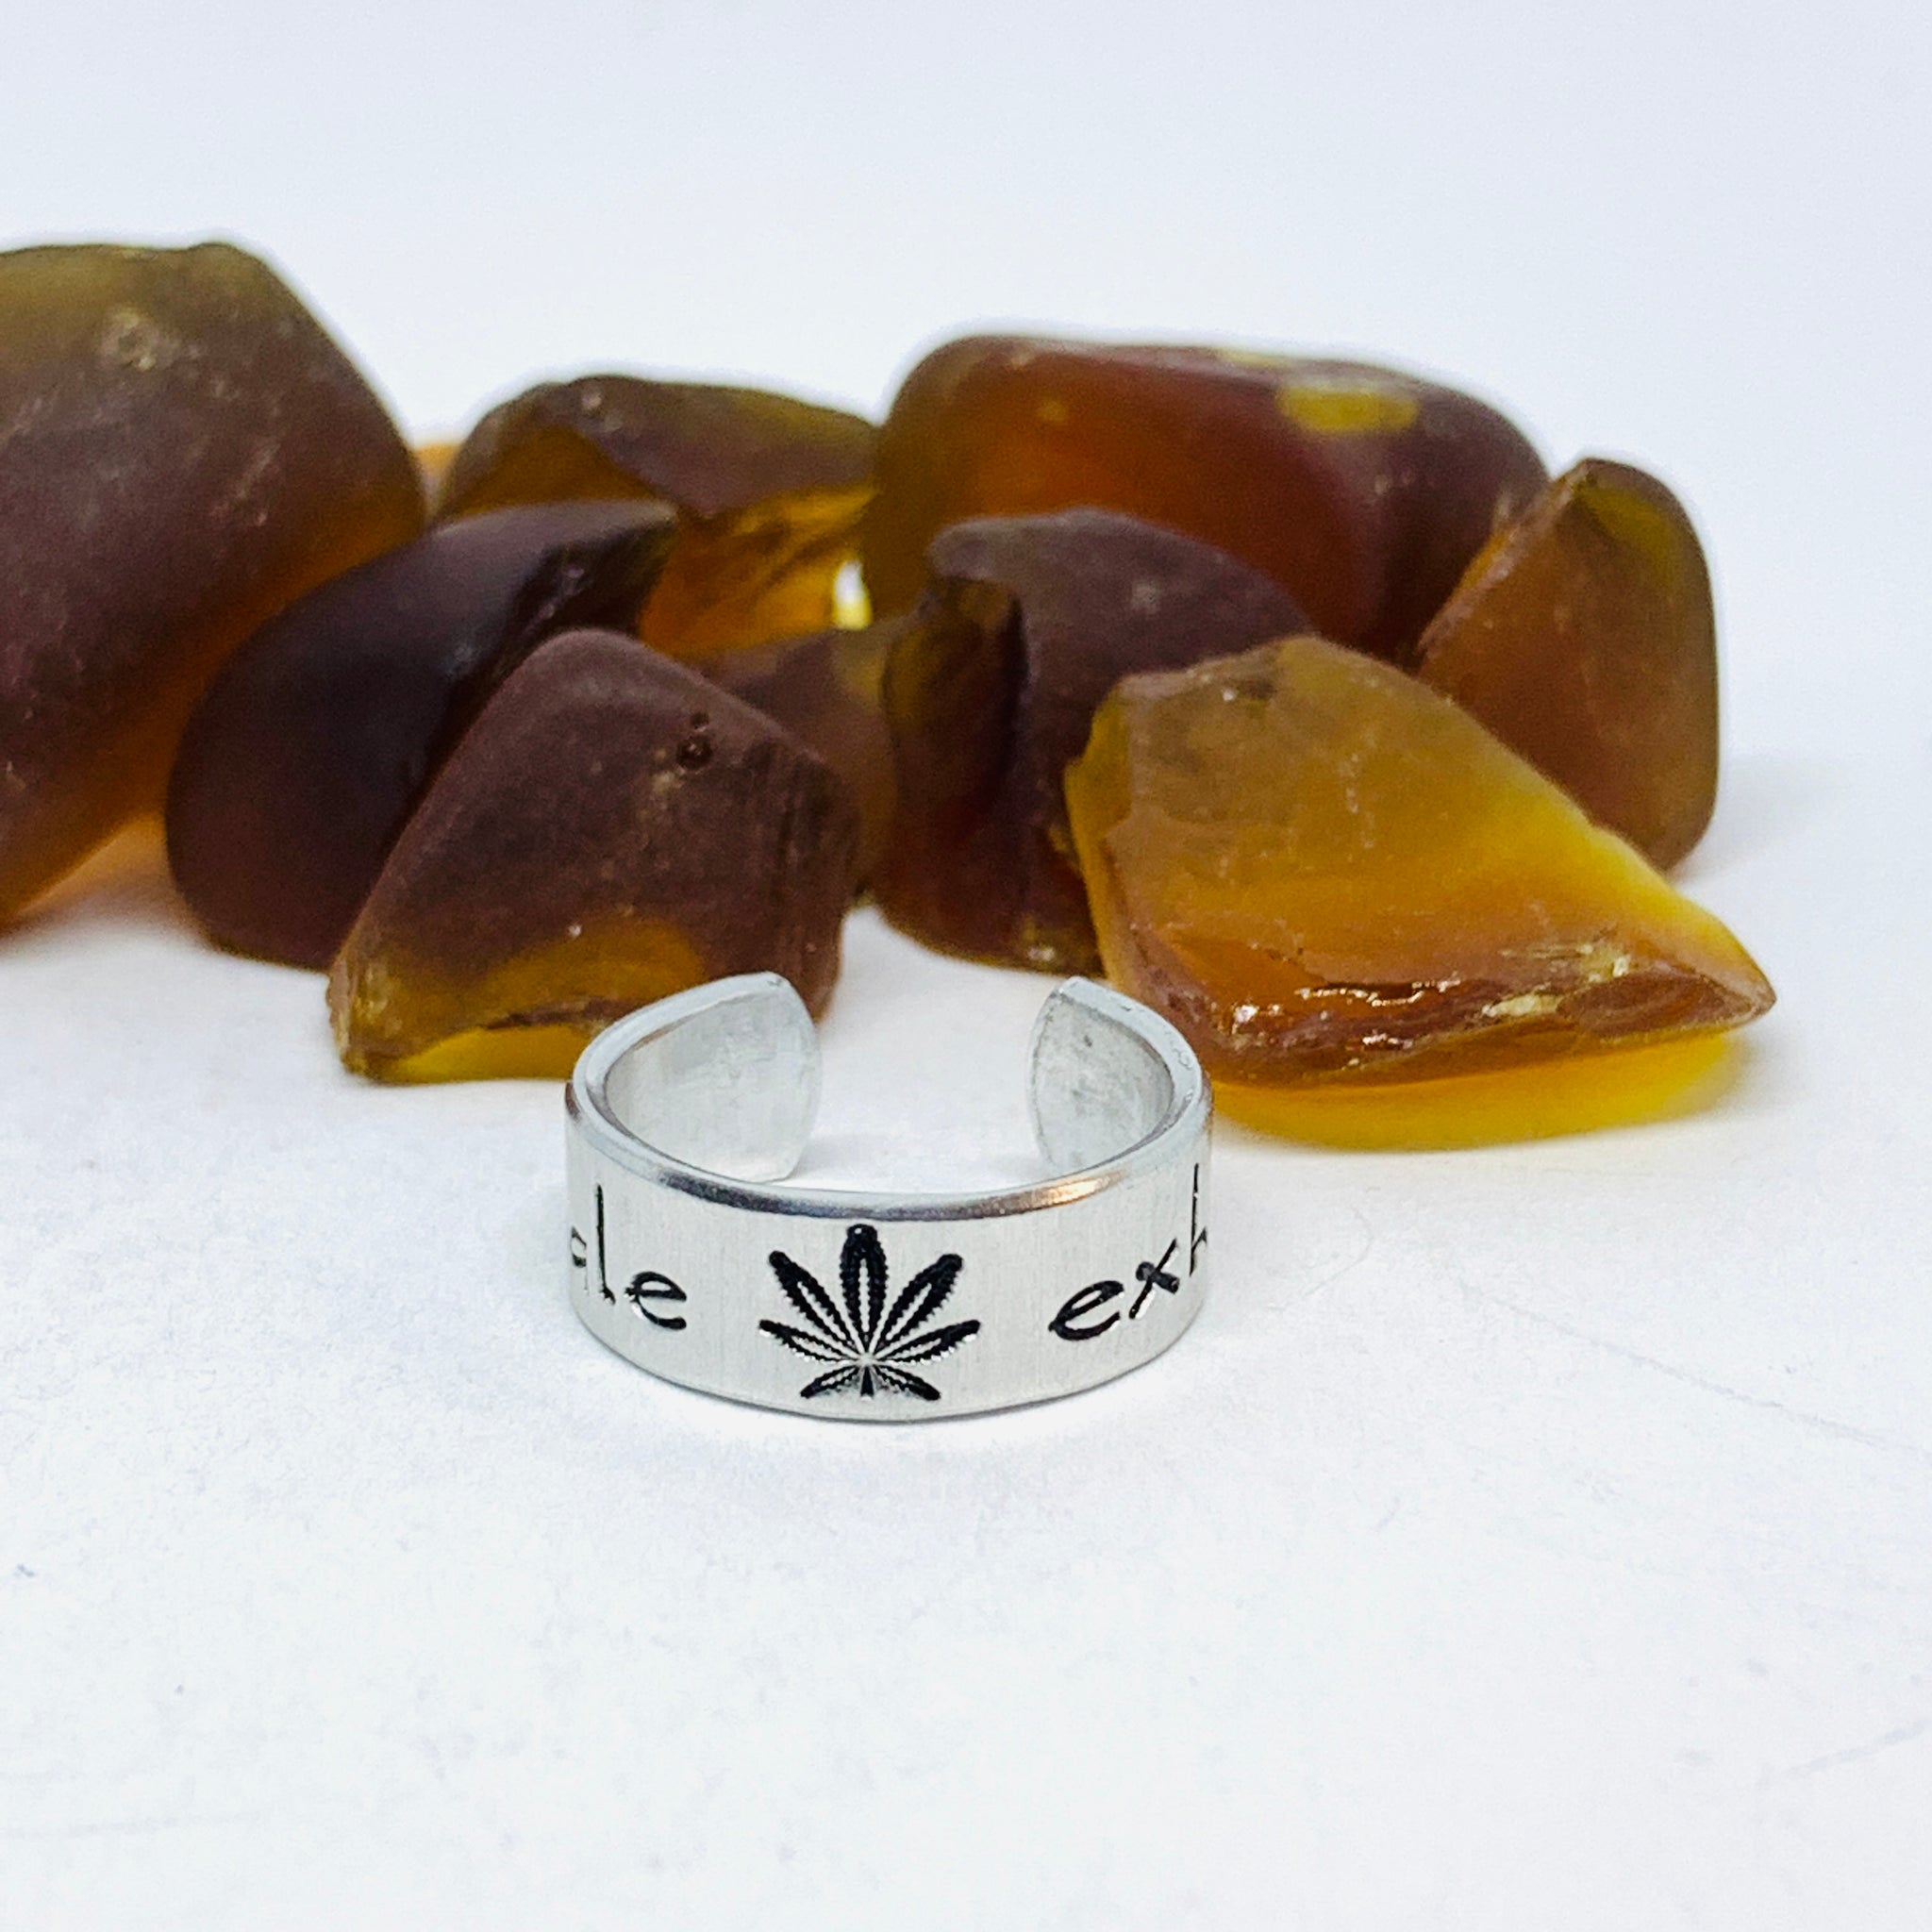 Inhale Exhale Hand Stamped Ring | Dispensary Pot Ring | Stamped Metal Cuff Ring | Marijuana Friendly | Pothead Jewelry | Weed Cannabis